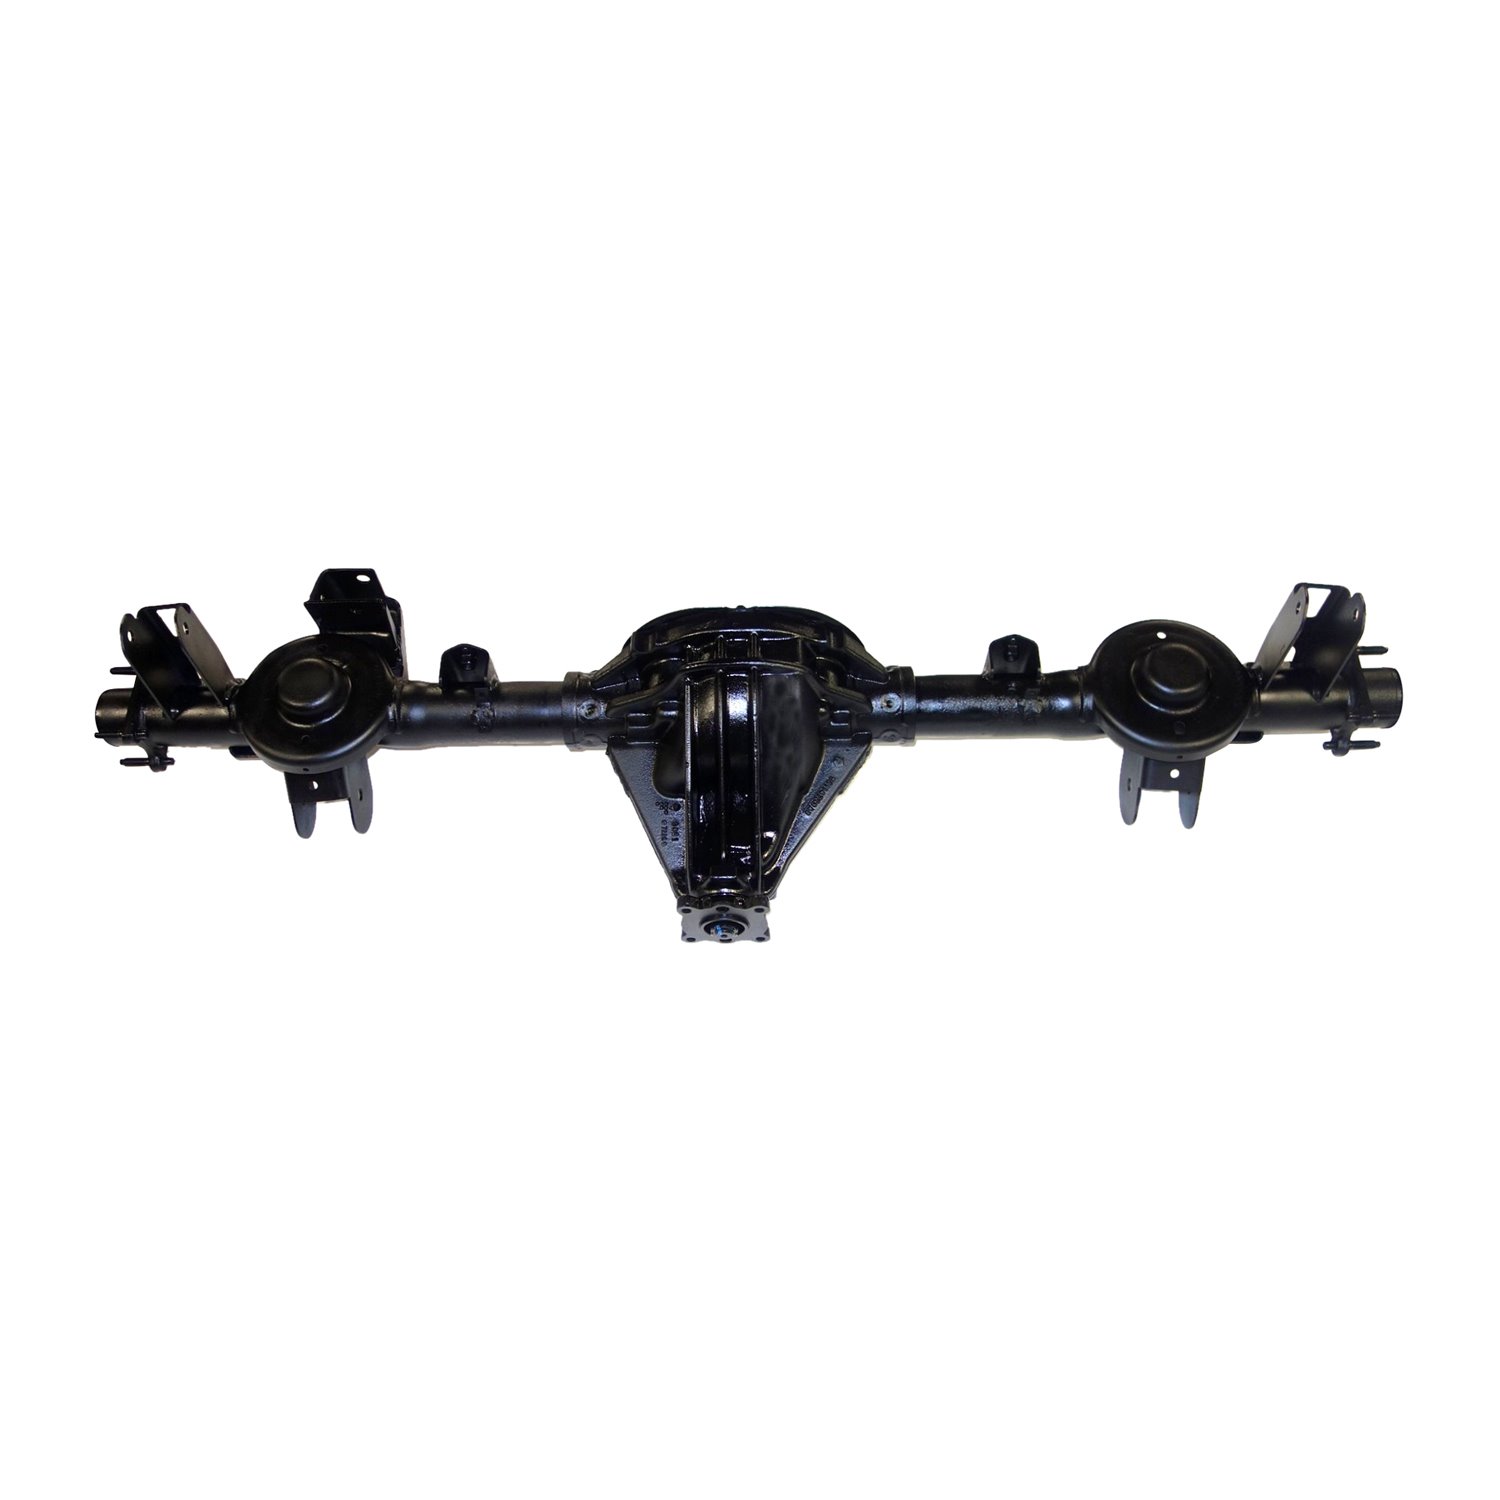 Remanufactured Complete Axle Assembly for Chy 8.25" 2002 Liberty 3.73 , 3.7l, WABS